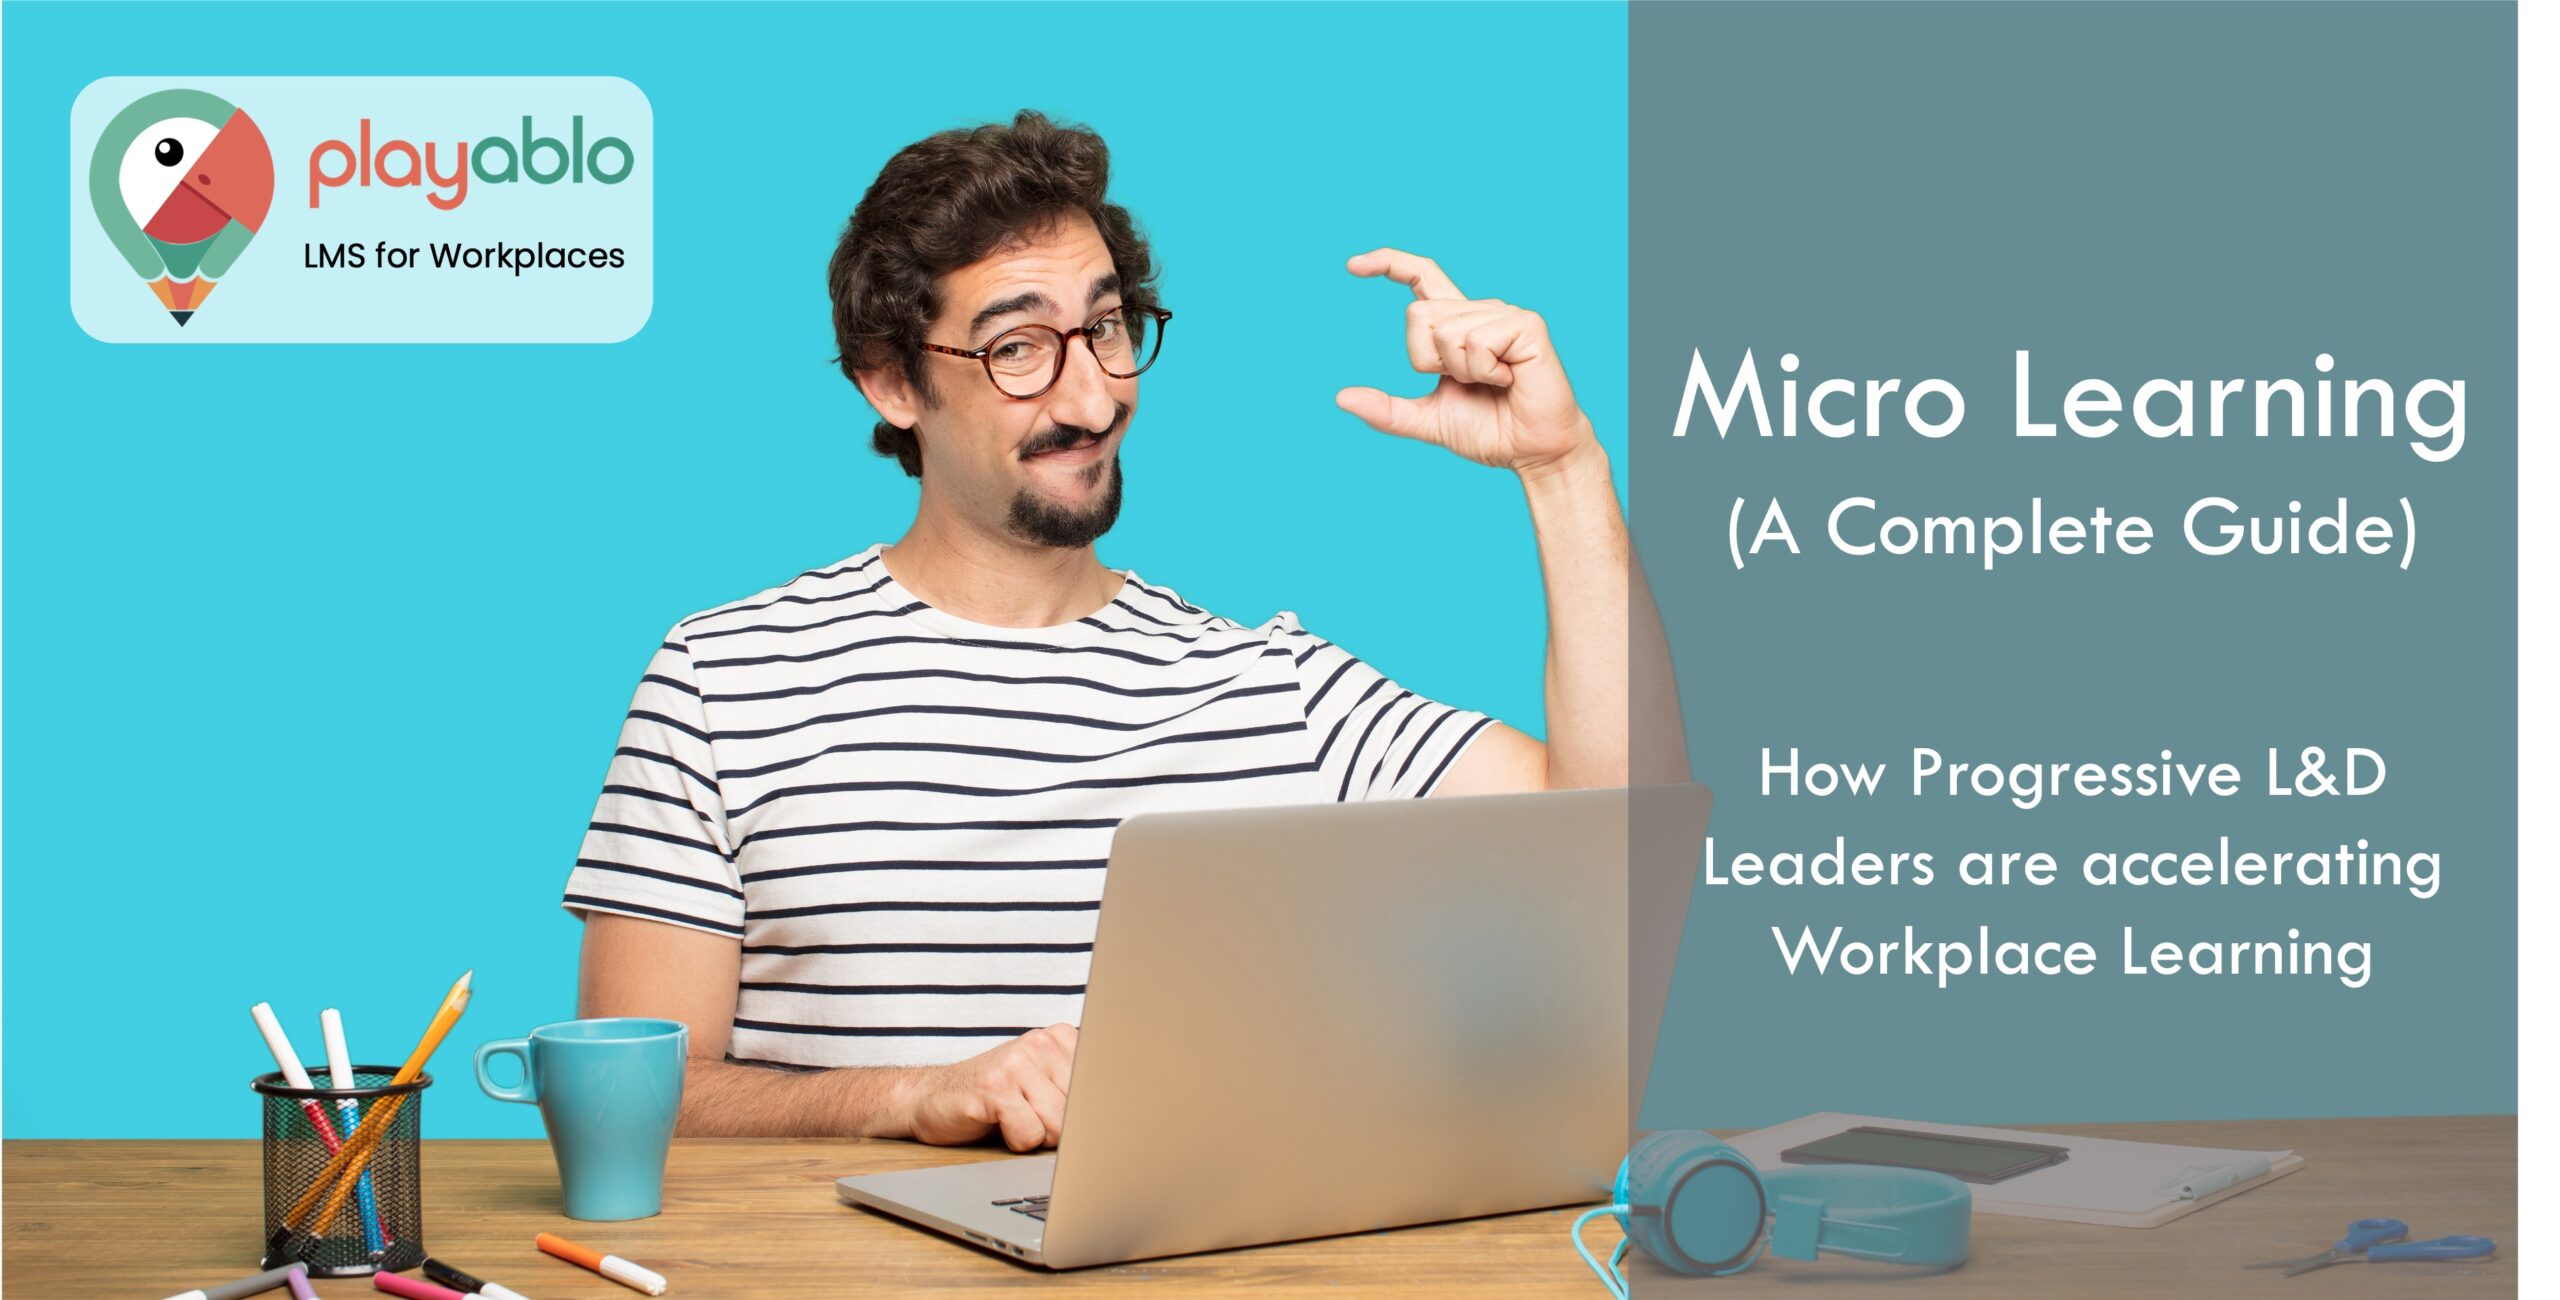 What is microlearning